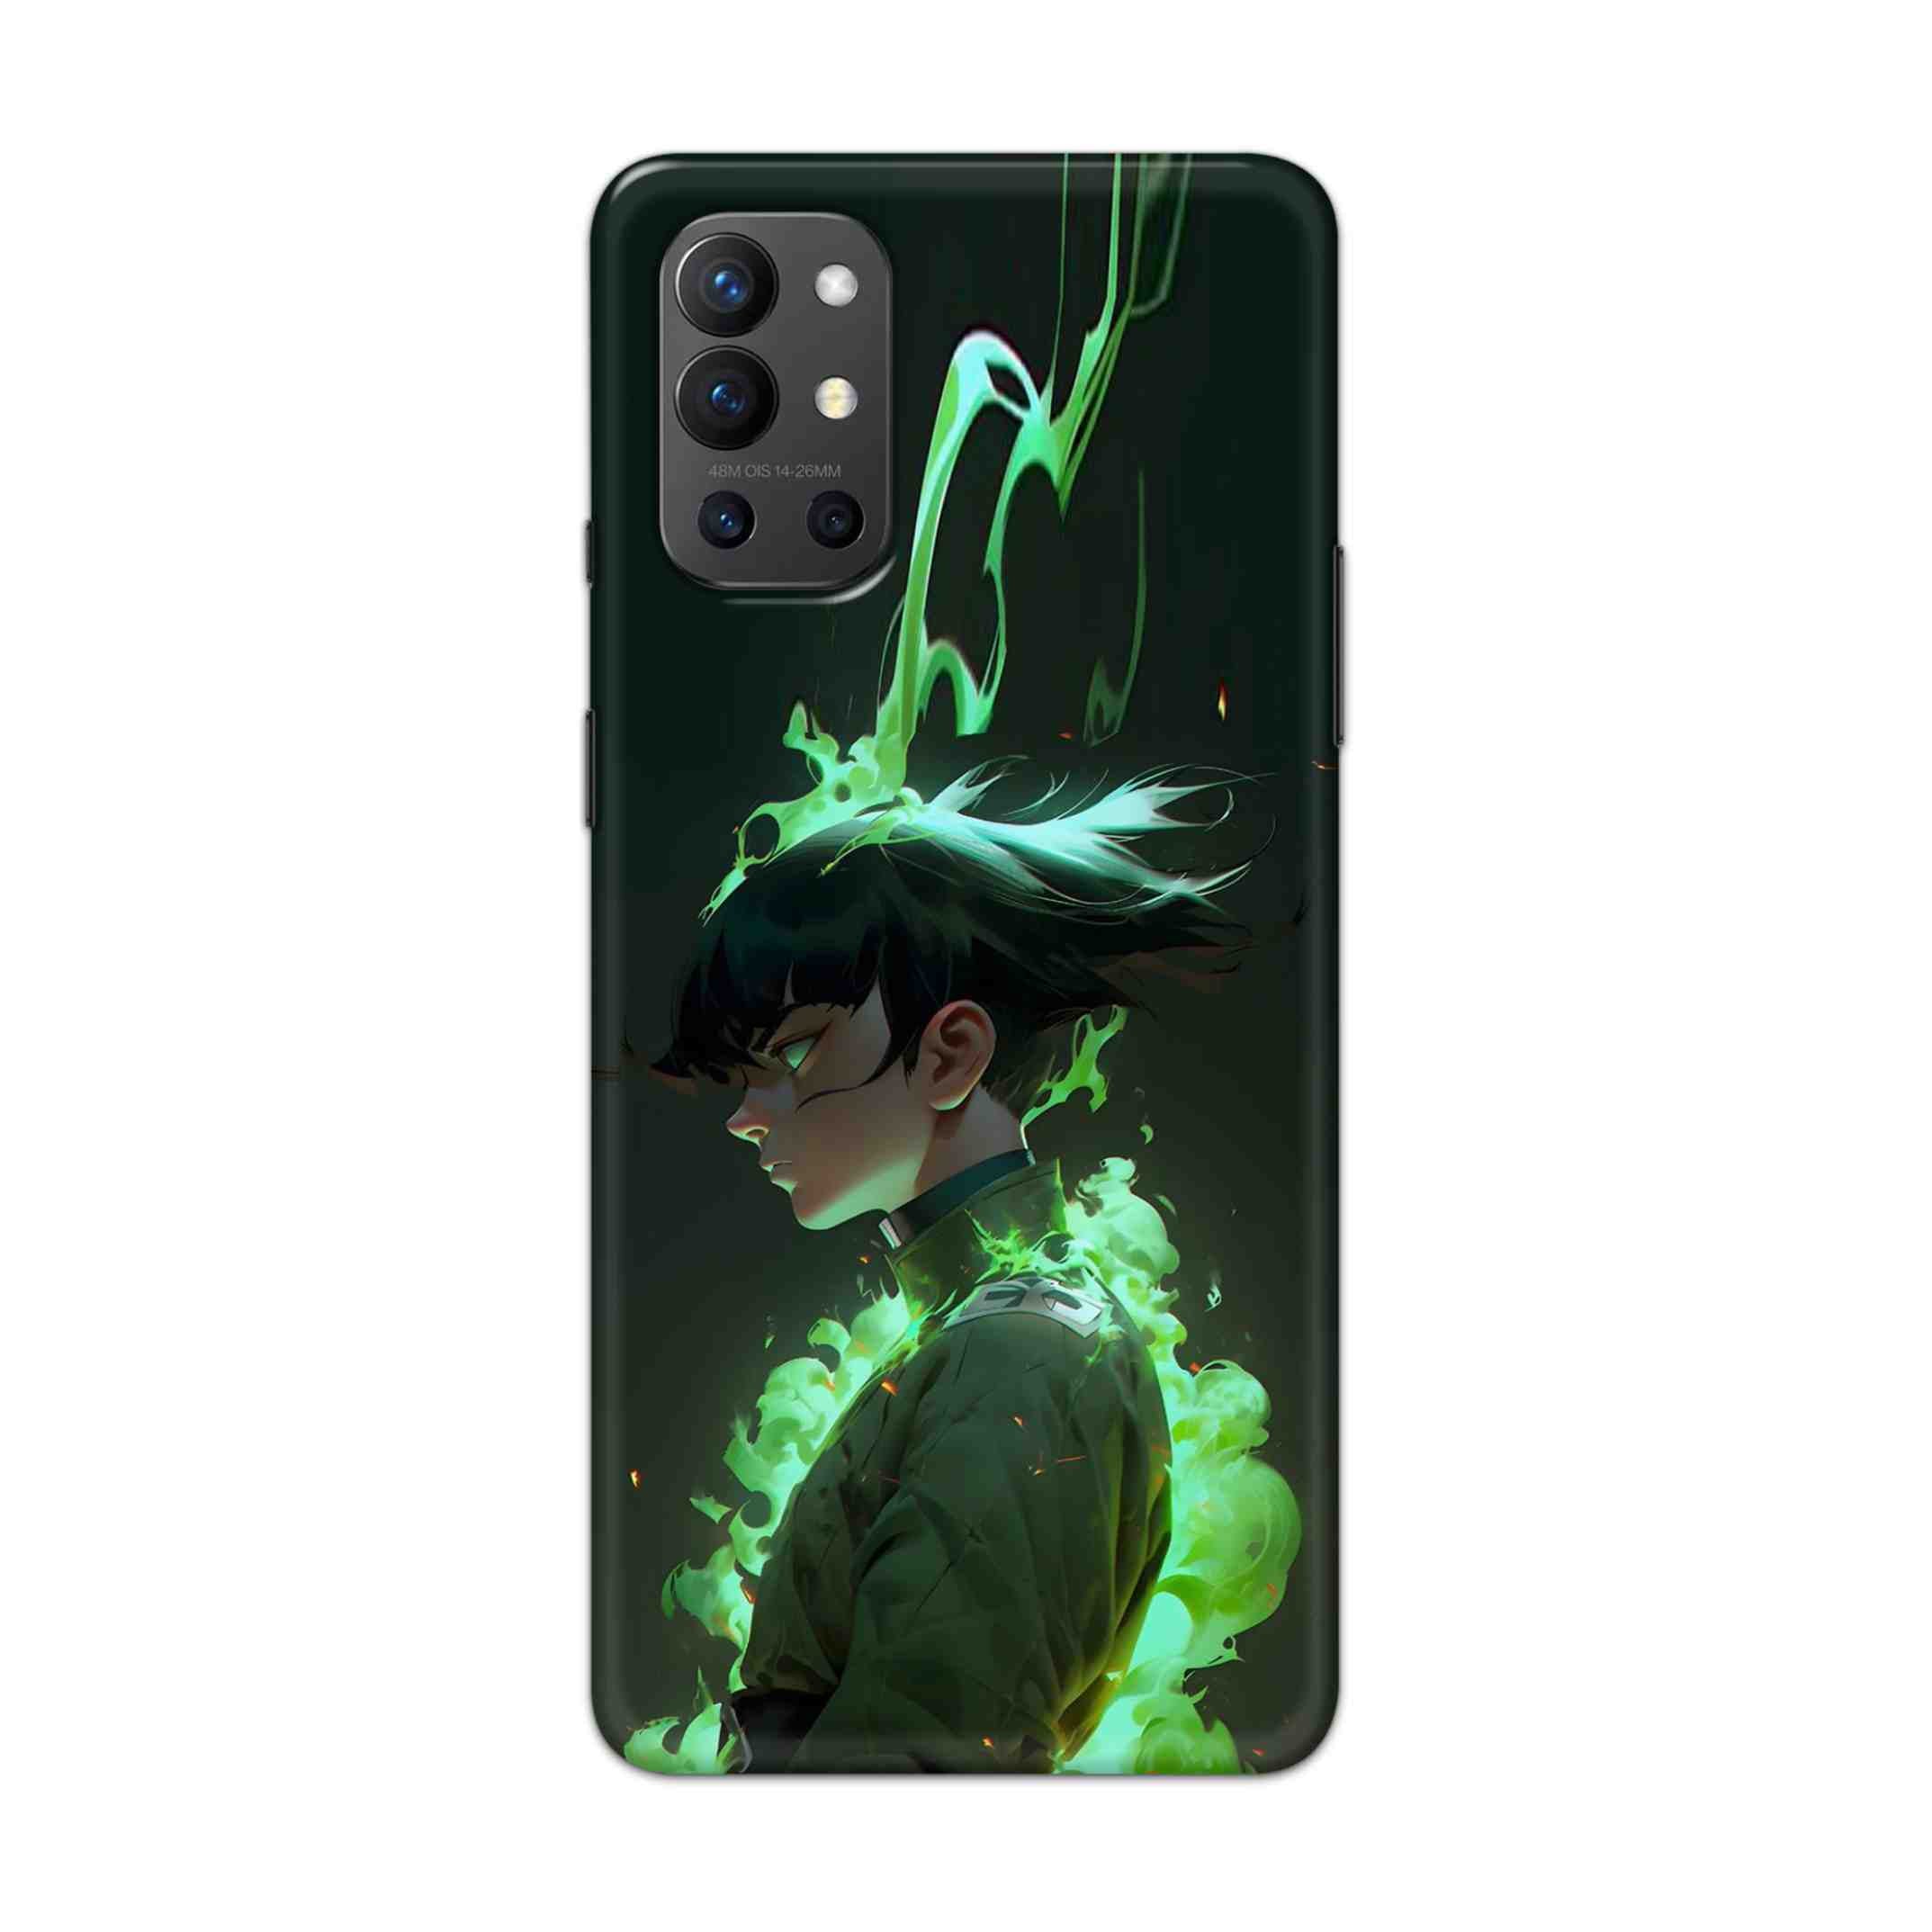 Buy Akira Hard Back Mobile Phone Case Cover For OnePlus 9R / 8T Online